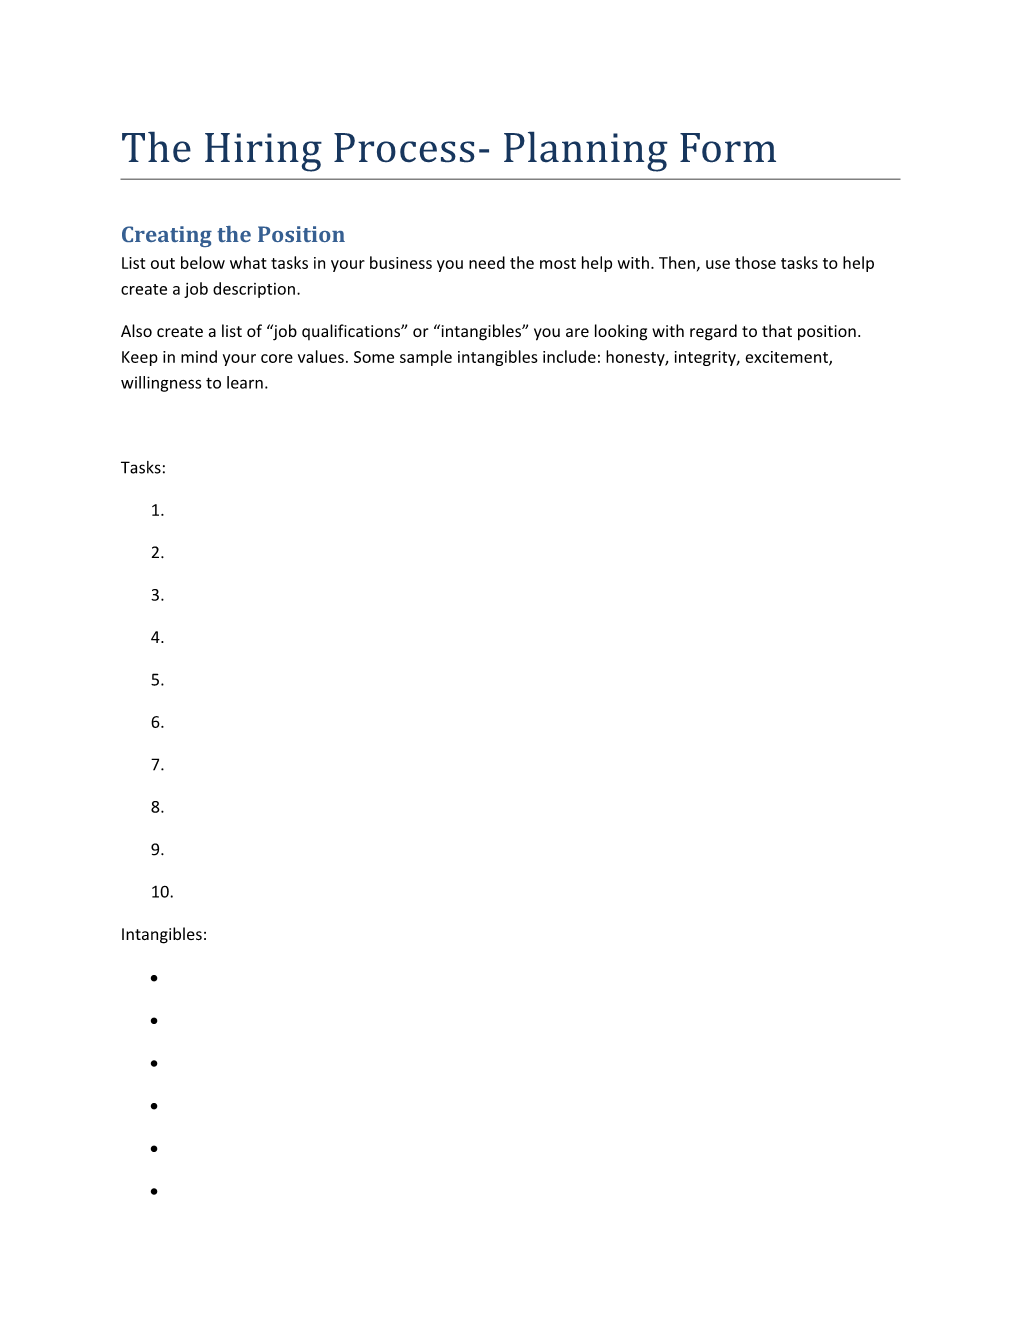 The Hiring Process- Planning Form